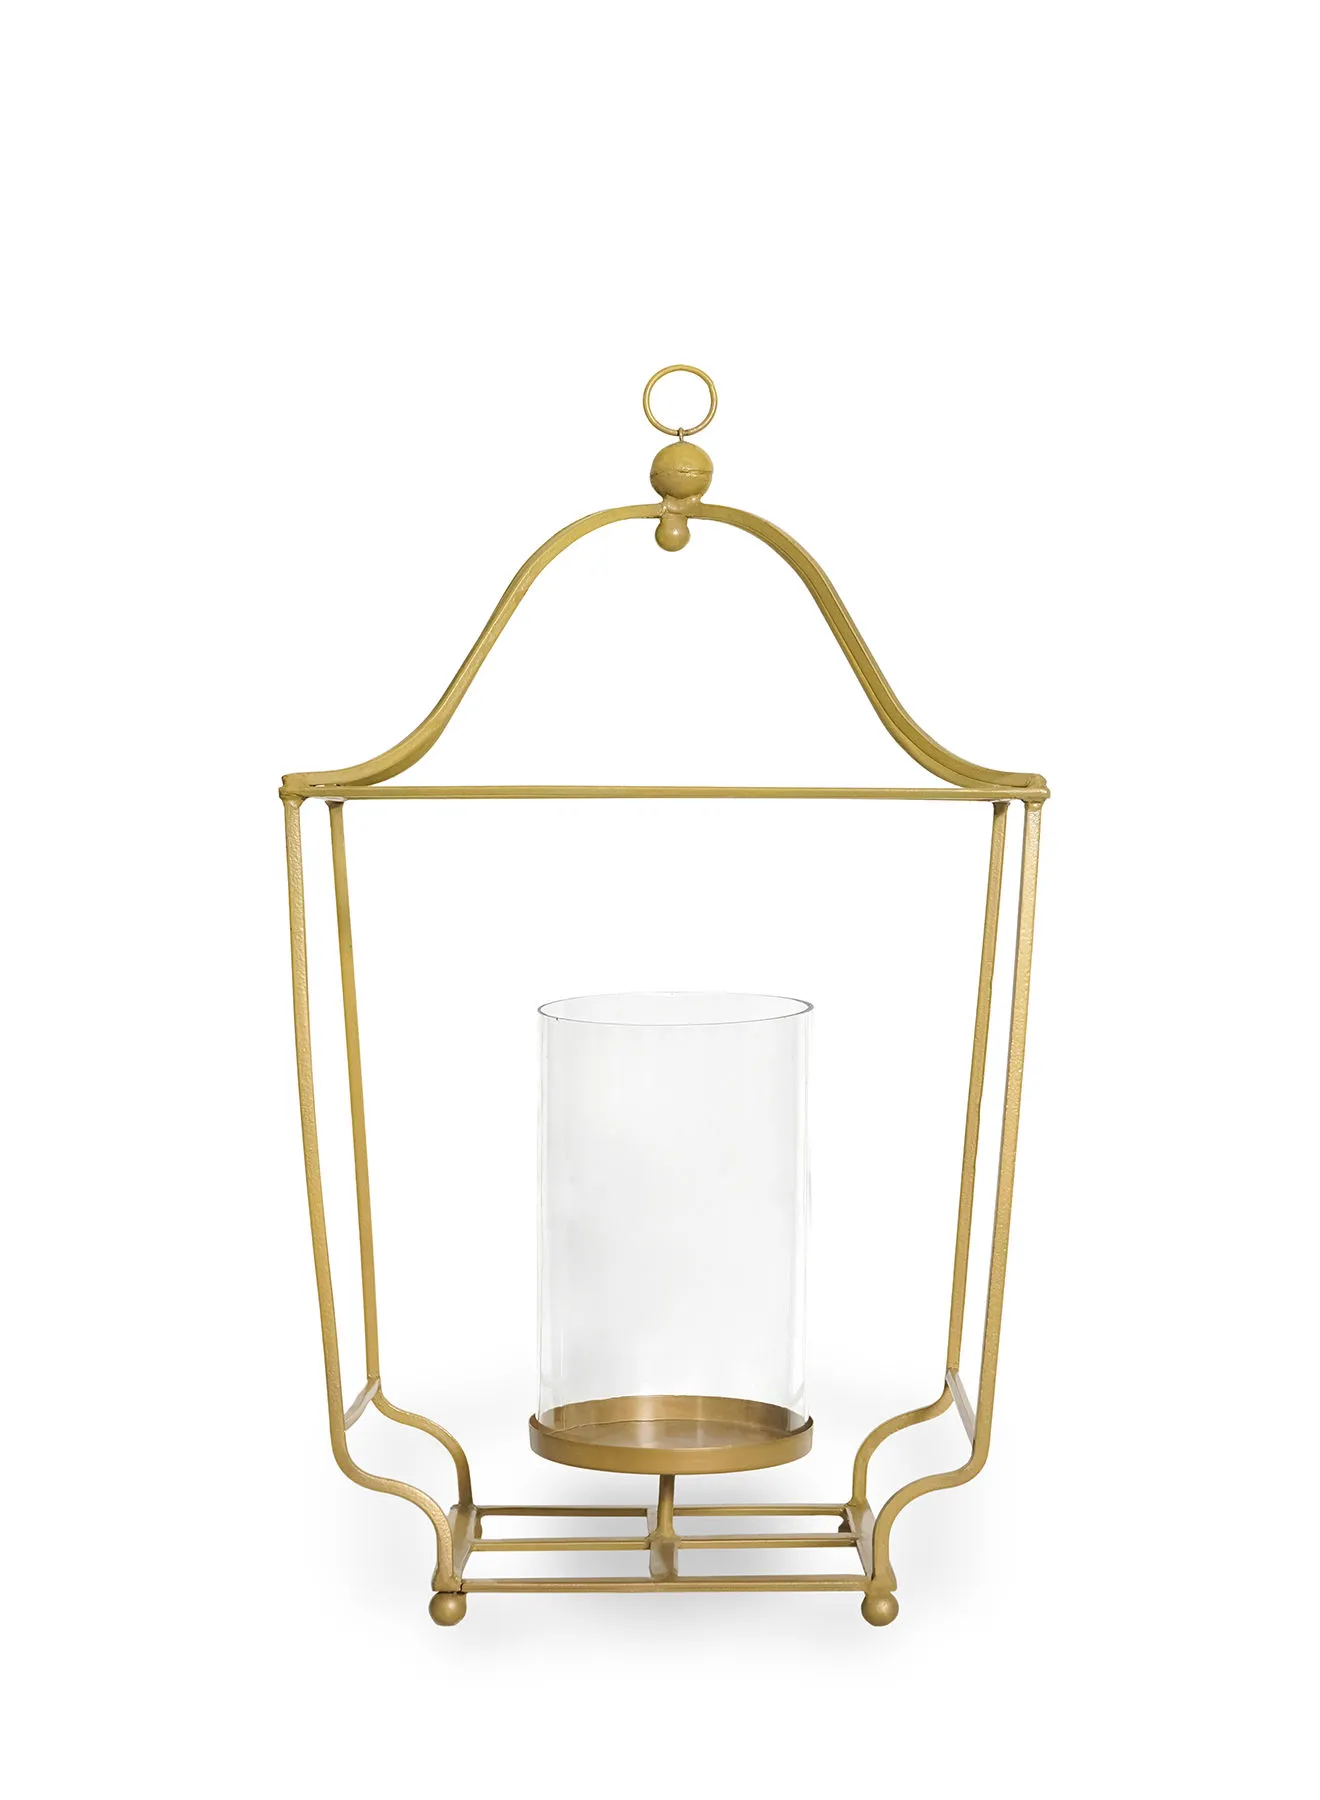 ebb & flow Modern Ideal Design Handmade Lantern  Unique Luxury Quality Scents For The Perfect Stylish Home Gold 14.83X13.83X40centimeter